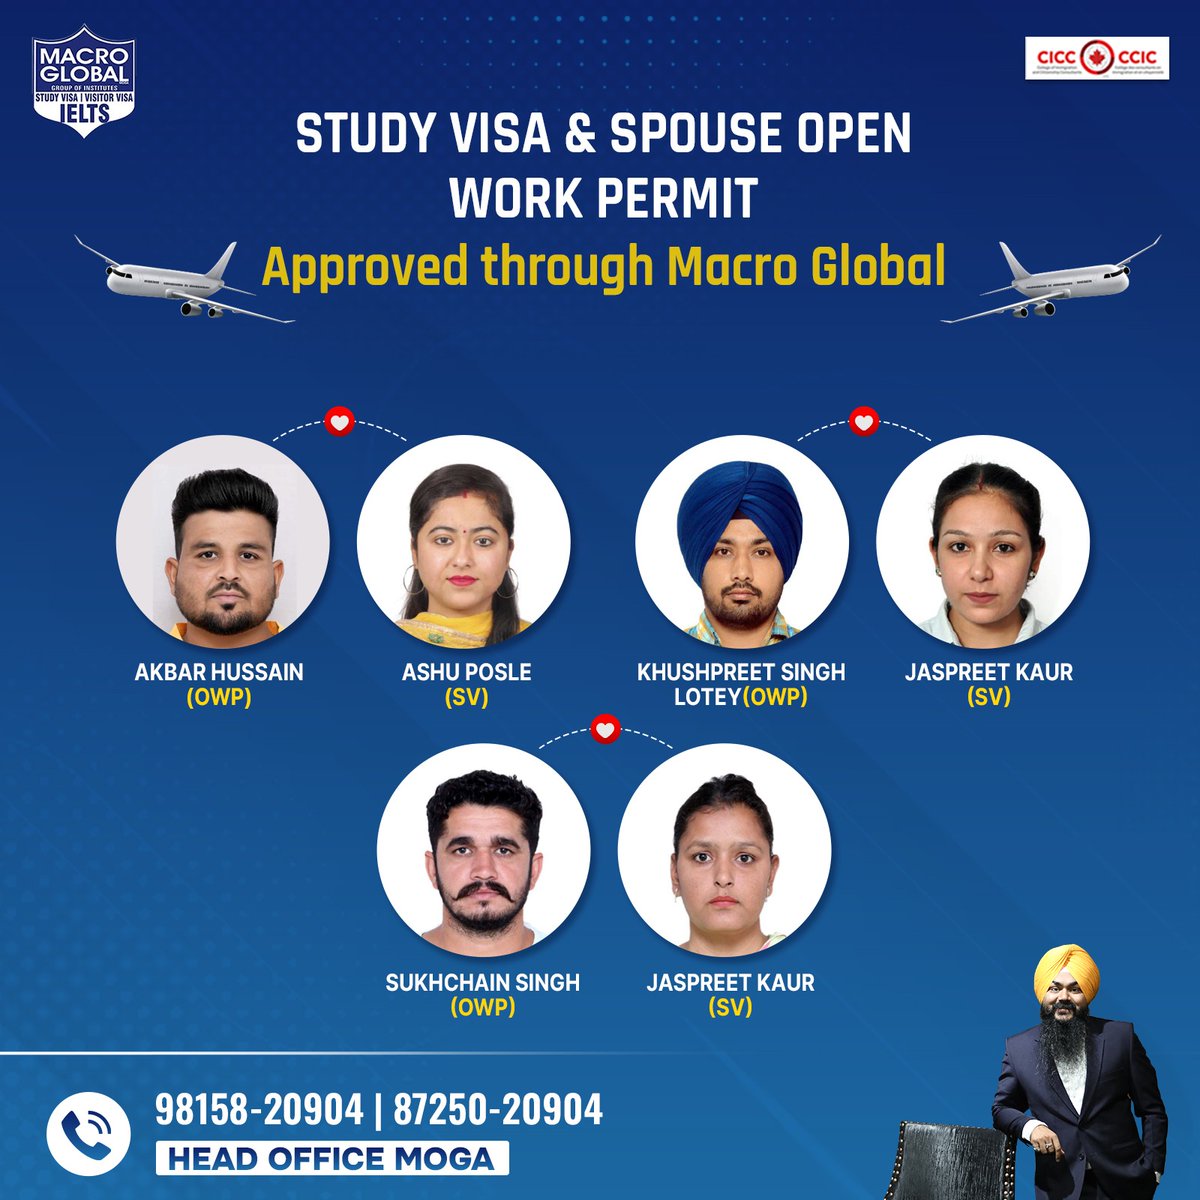 🚀 Double the success stories, double the joy! Our recent clients secured not only their Canada Study Visas but also their Spouse Open Work Permits with Macro Global's expert guidance. 🇨🇦
.
.
#MacroGlobal #GurmilapSinghDalla #Canada #Canadastudyvisa #canadaopenworkpermit